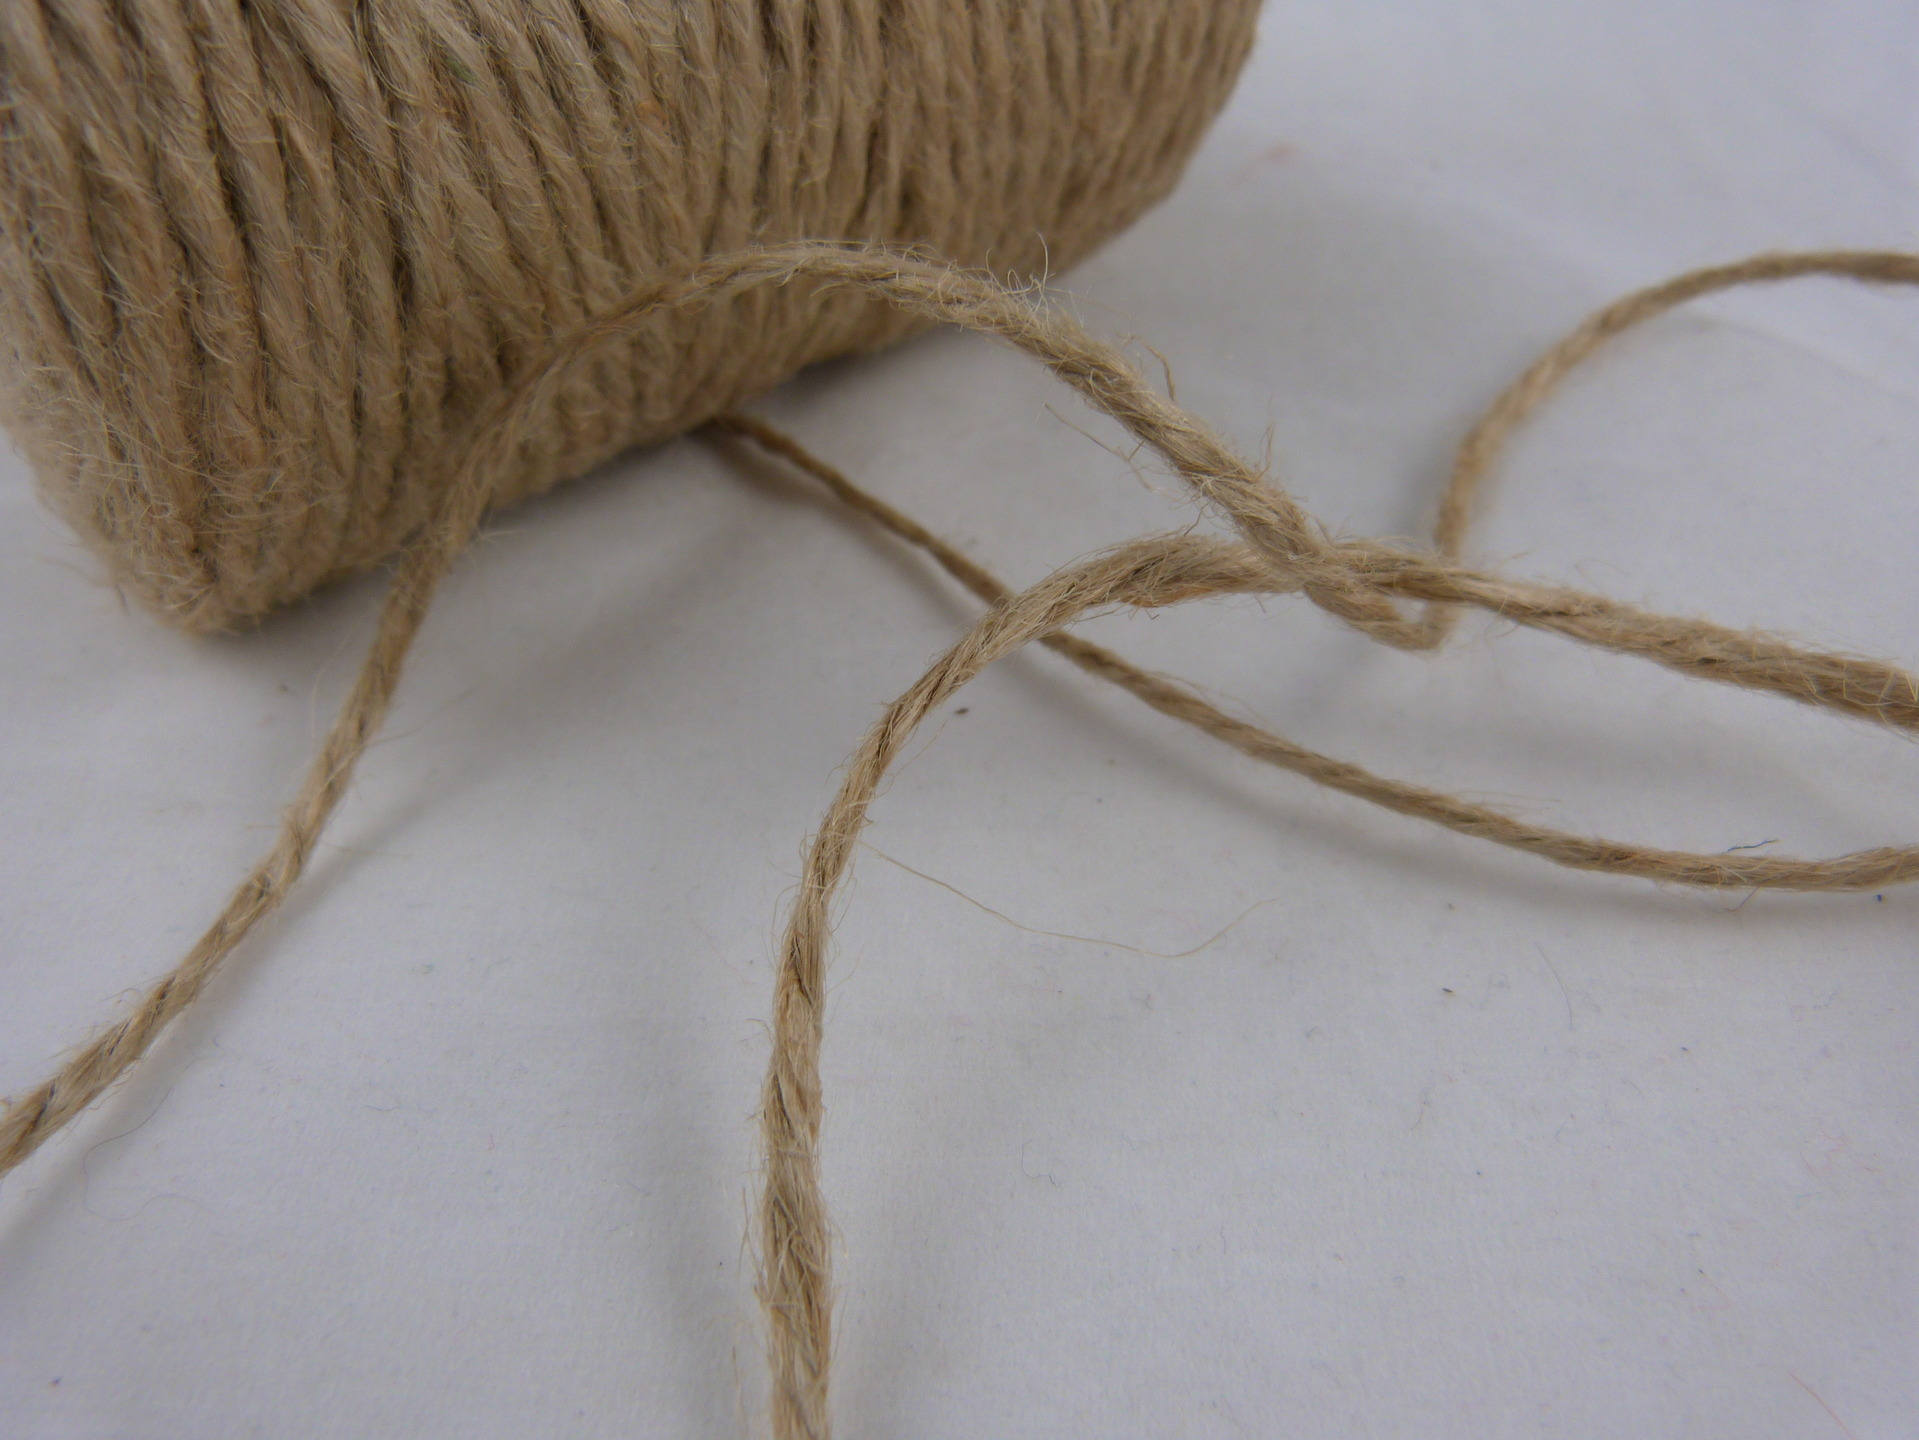 Jute Rope,natural Jute Twine for Packaging, Gift Wrapping